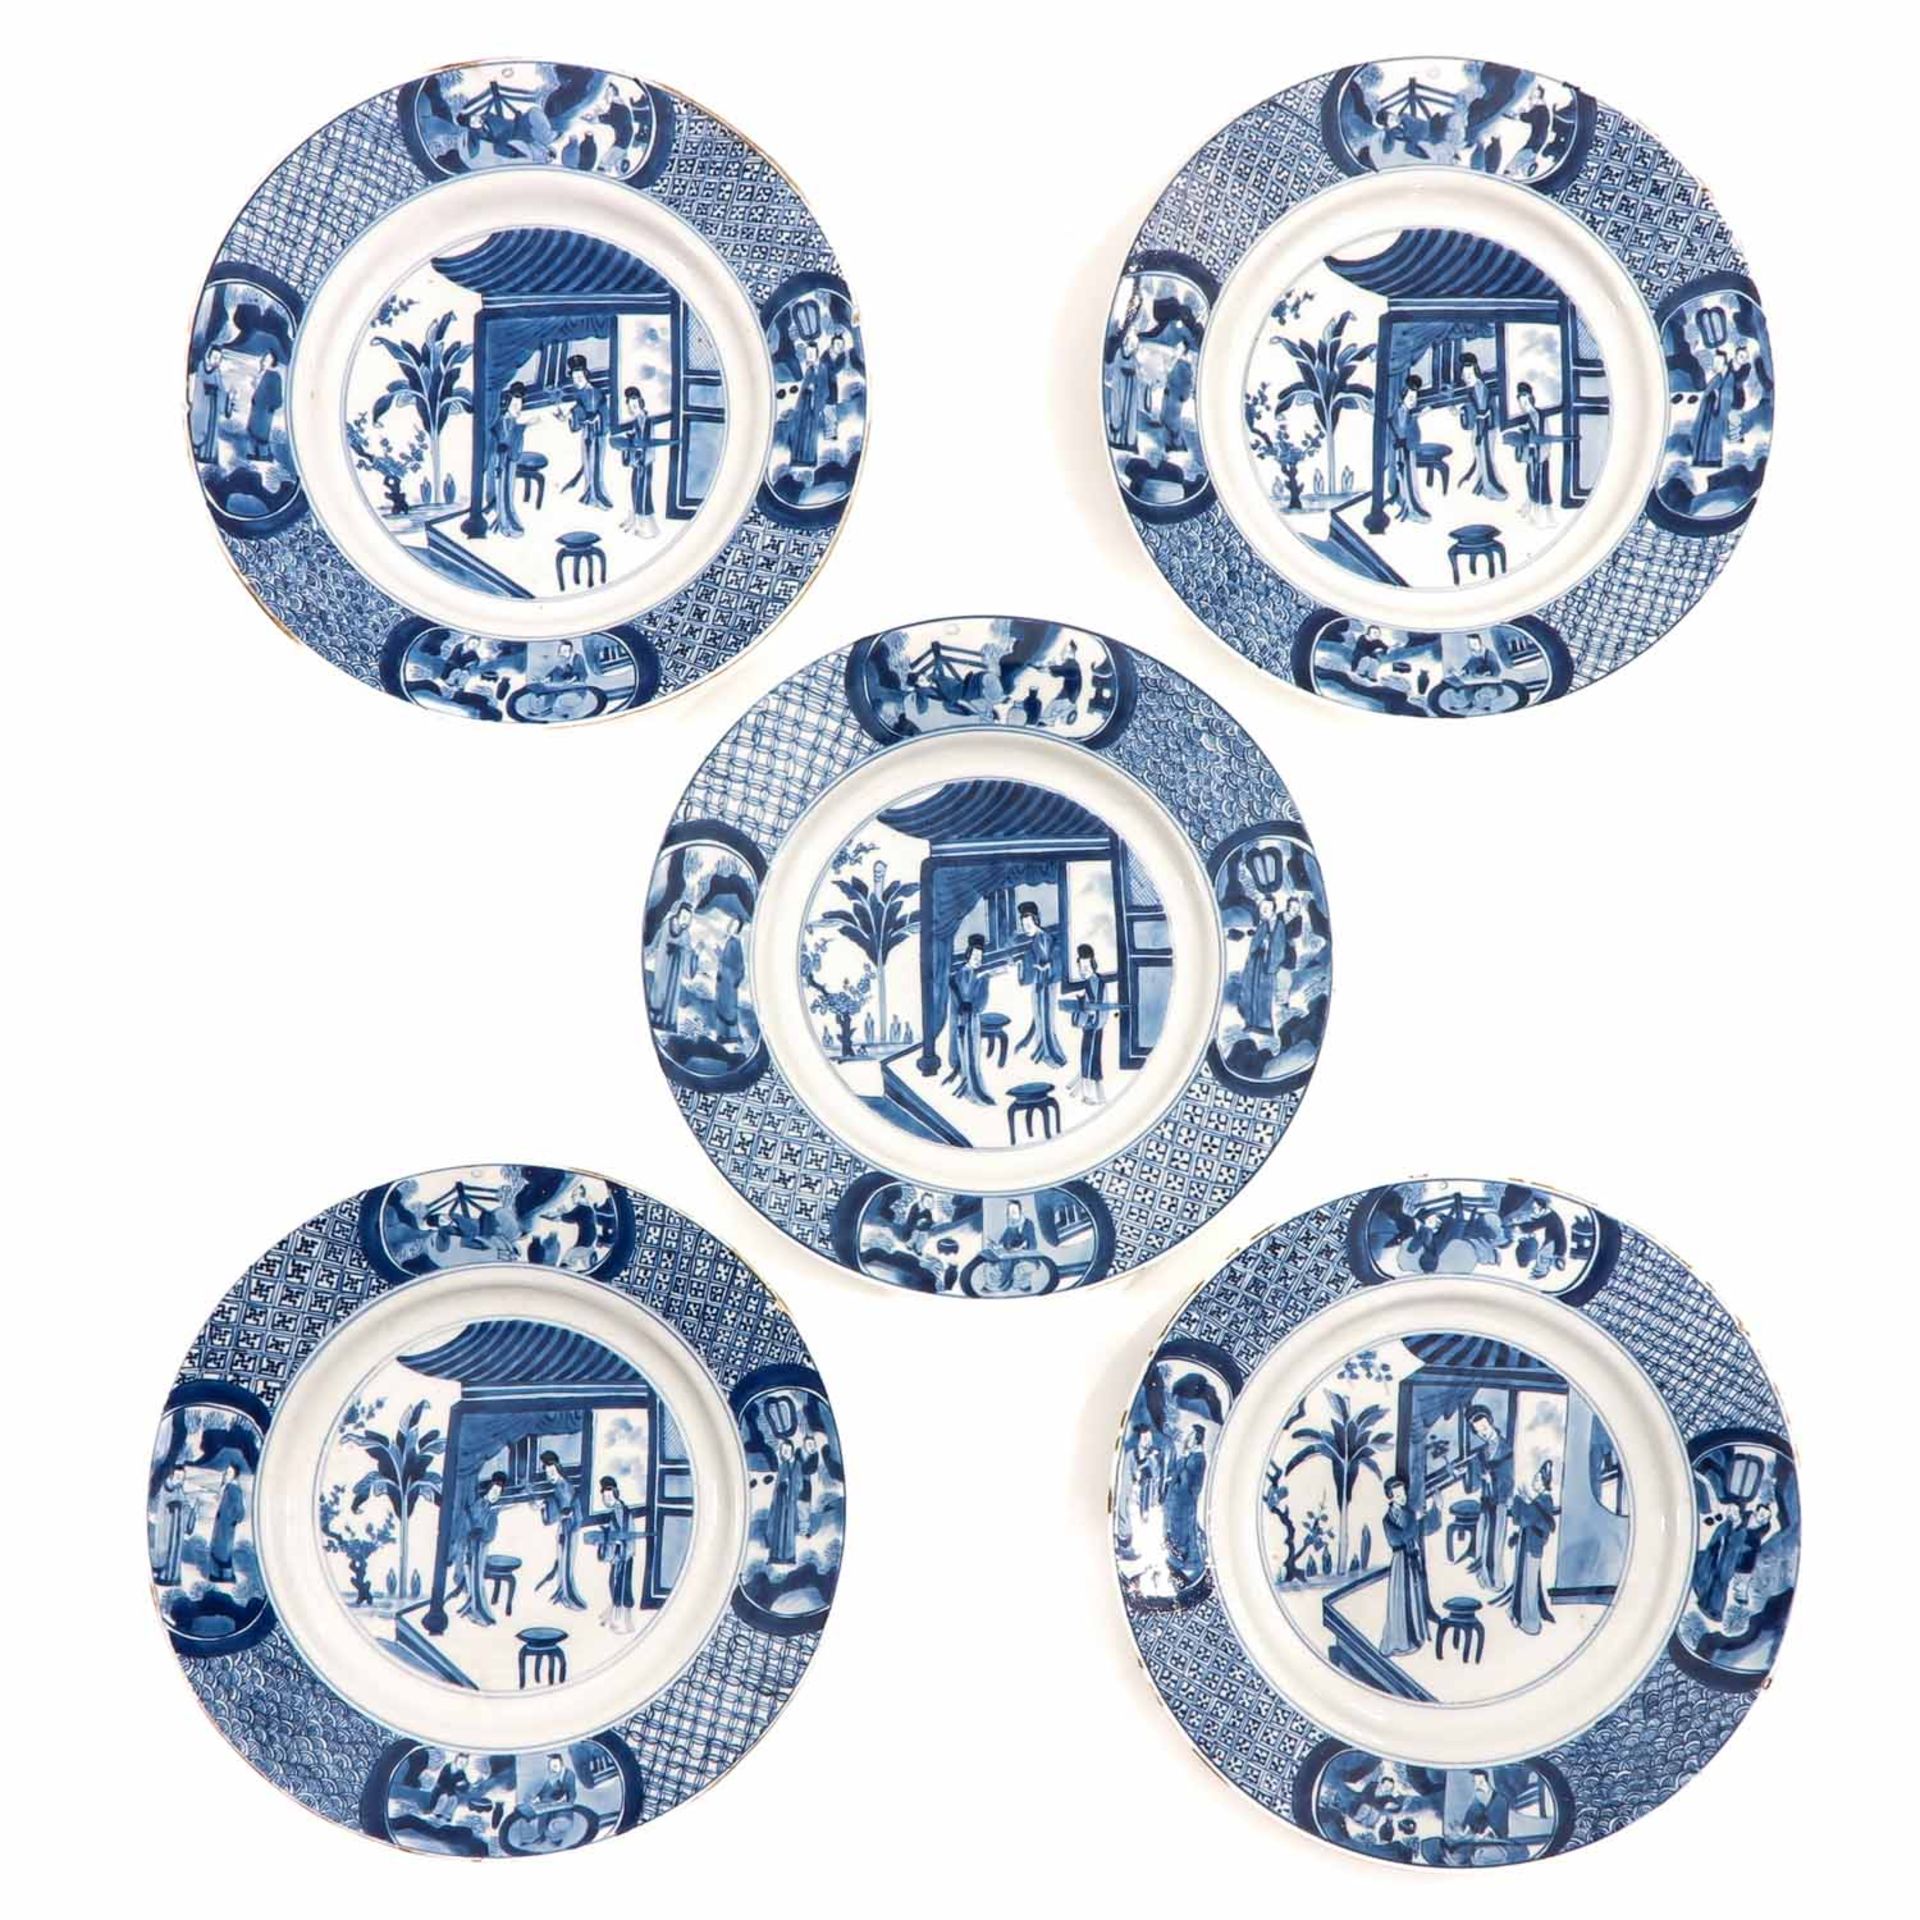 A Series of 5 Blue and White Plates